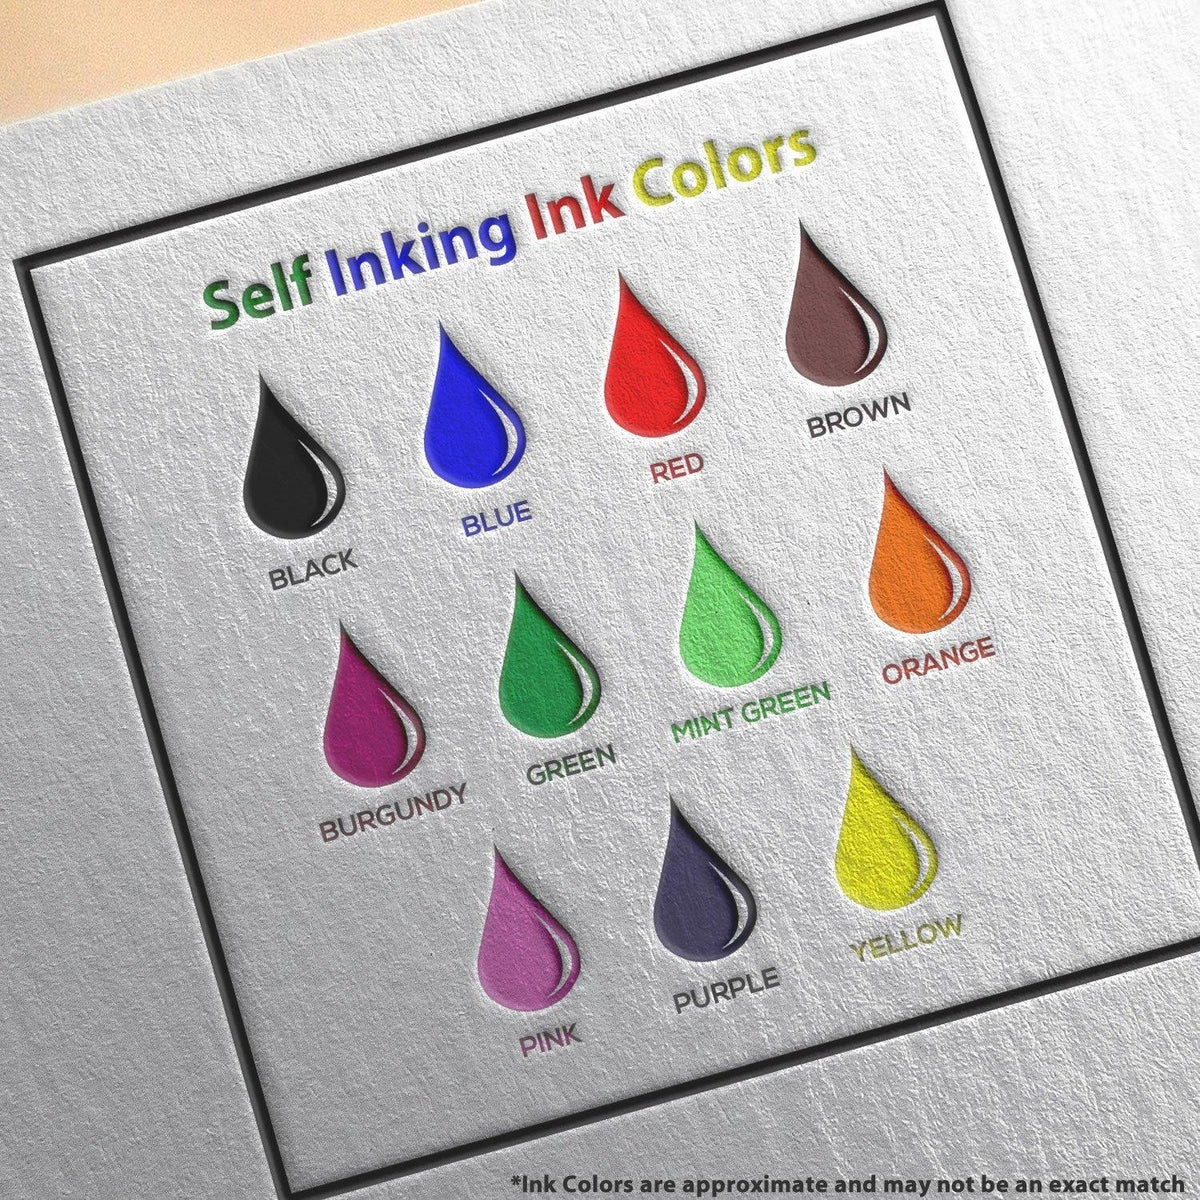 Self Inking Two Line Received Stamp - Engineer Seal Stamps - Brand_Trodat, Impression Size_Small, Stamp Type_Self-Inking Stamp, Type of Use_Office, Type of Use_Postal &amp; Mailing, Type of Use_Shipping &amp; Receiving